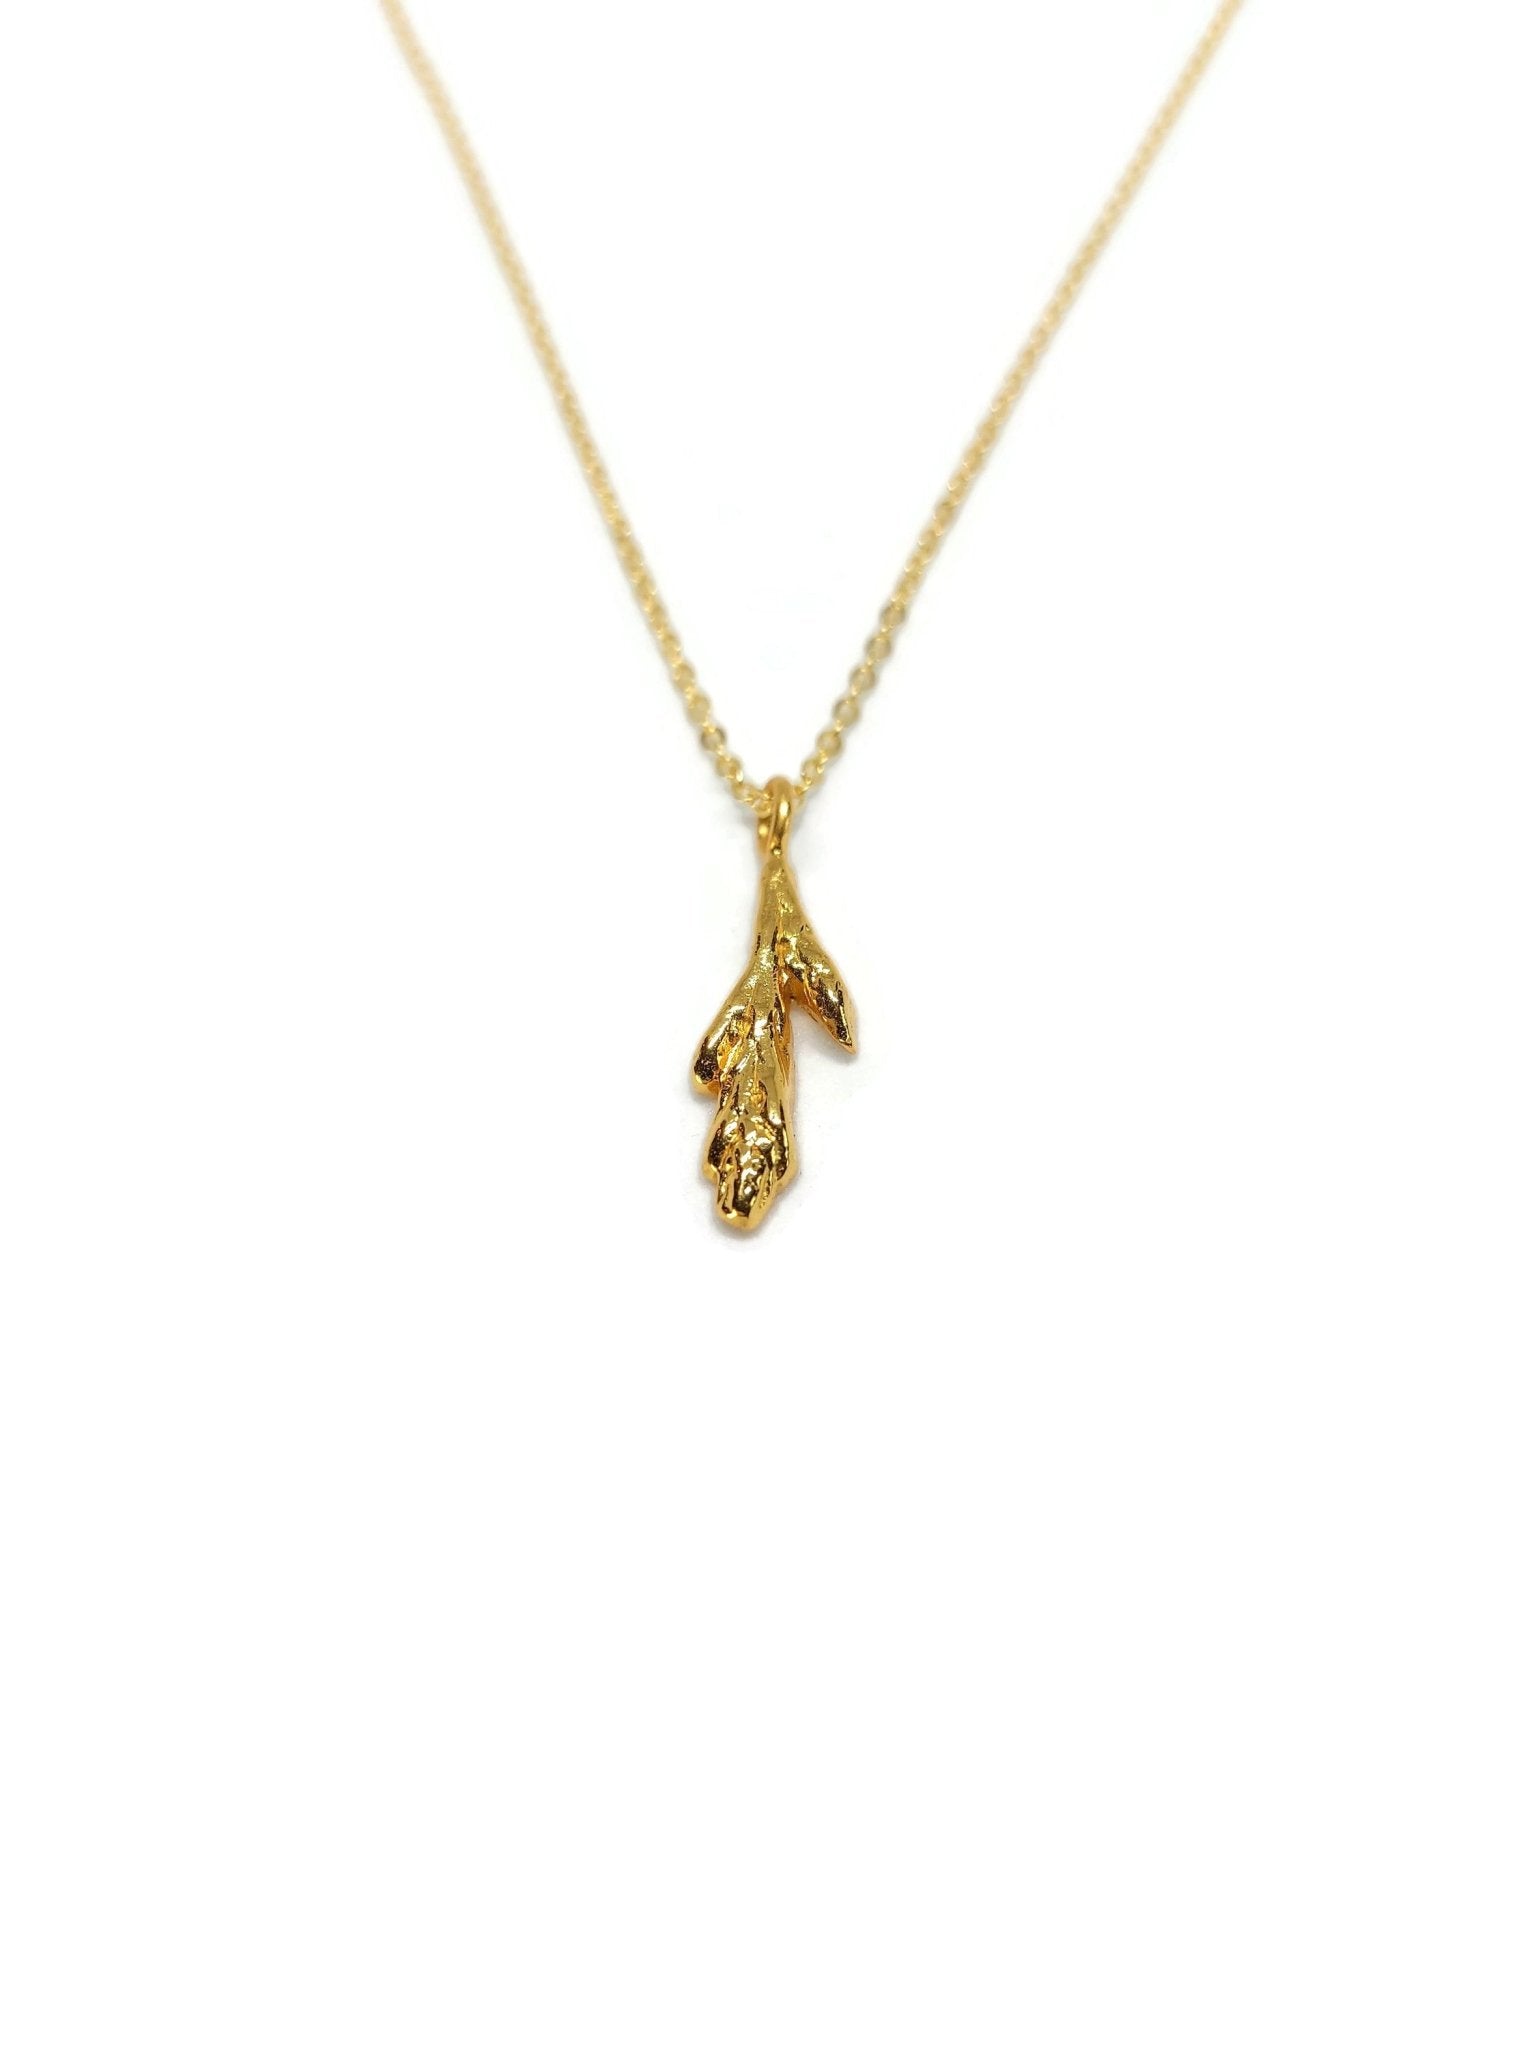 18k yellow gold plated little cedar leaf design pendant necklace on white background - 2